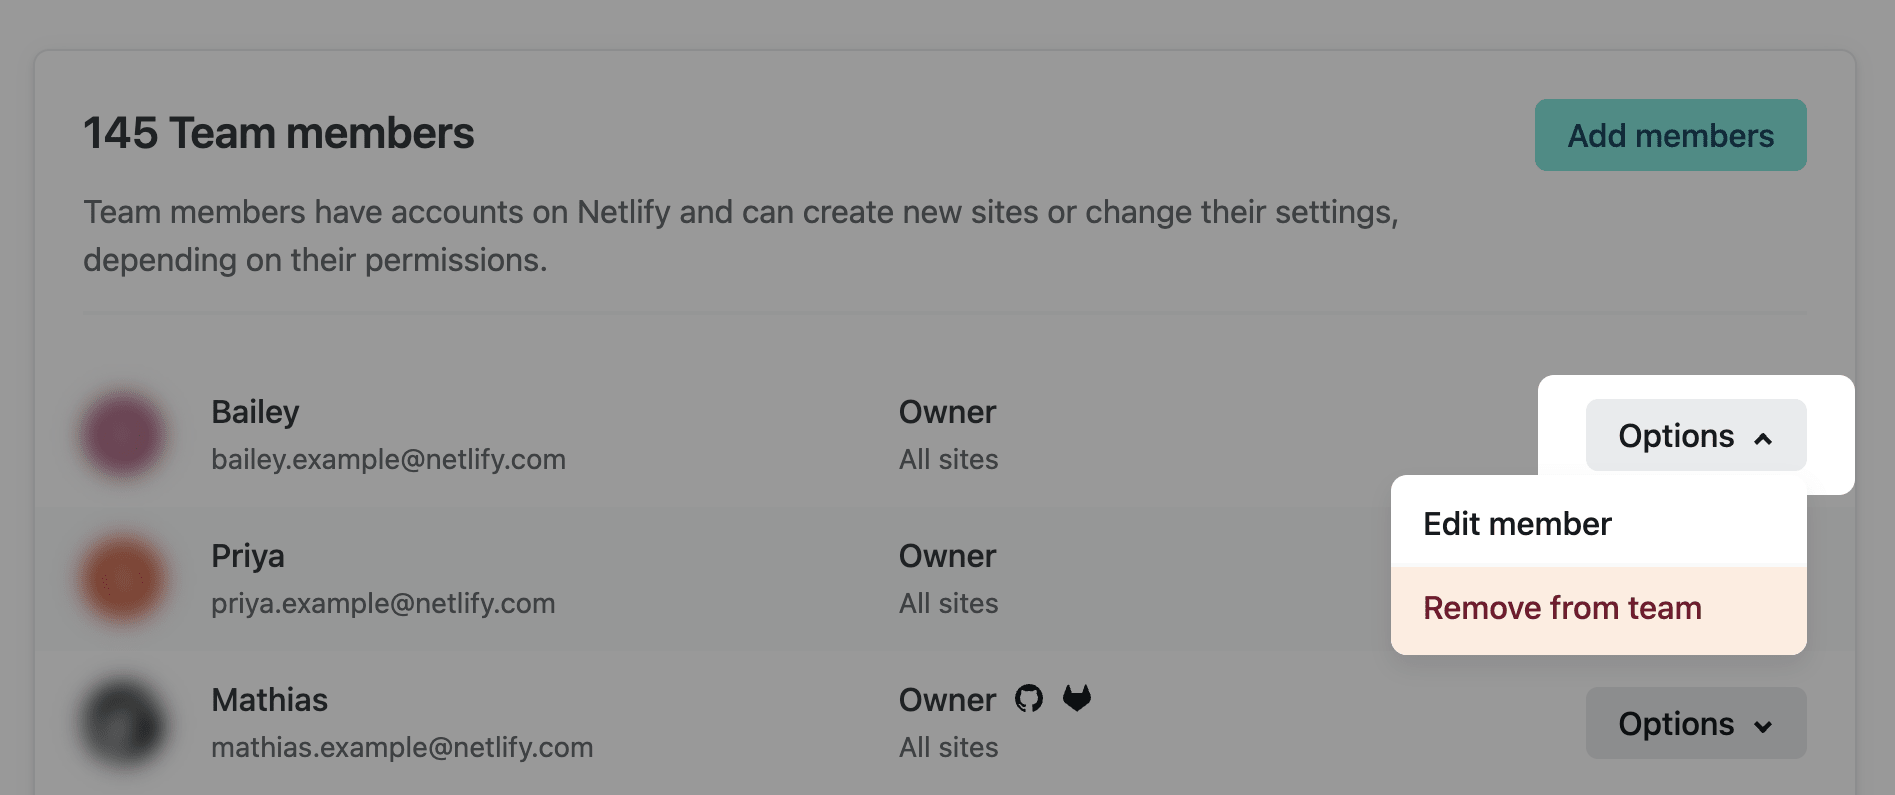 Owners can use the "Options" menu to remove or edit a member.